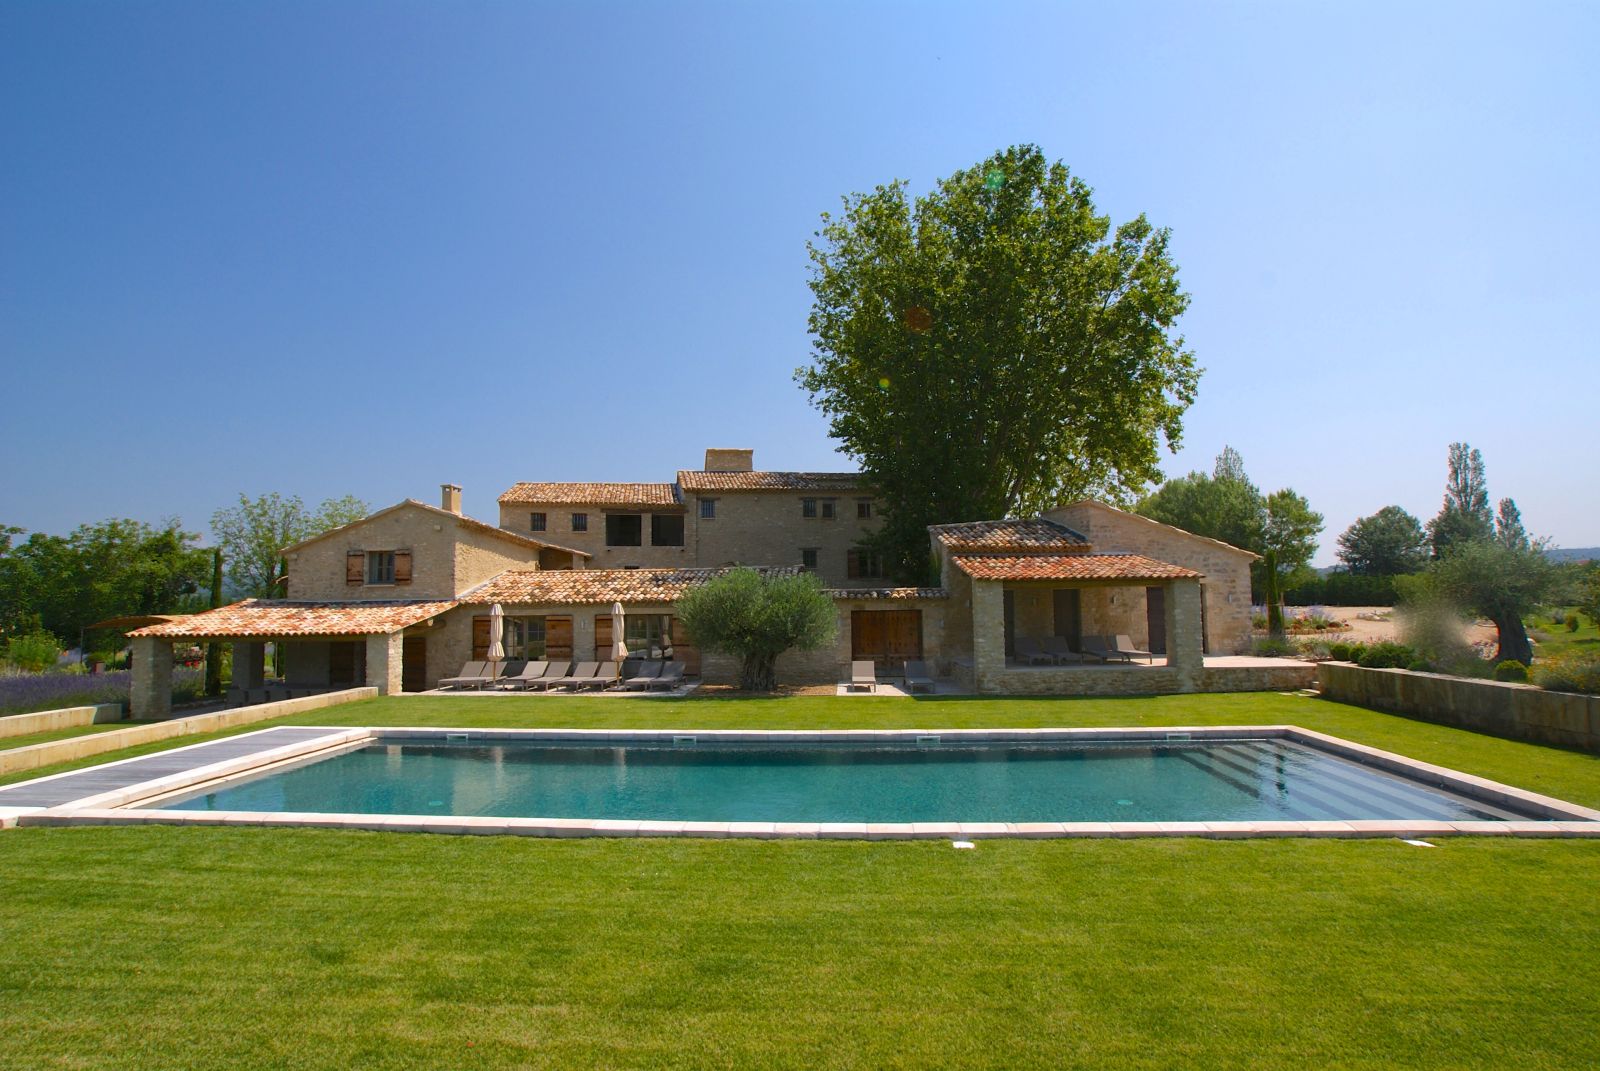 Provence Luberon luxury villa rentals with heated private pool hammam[....]